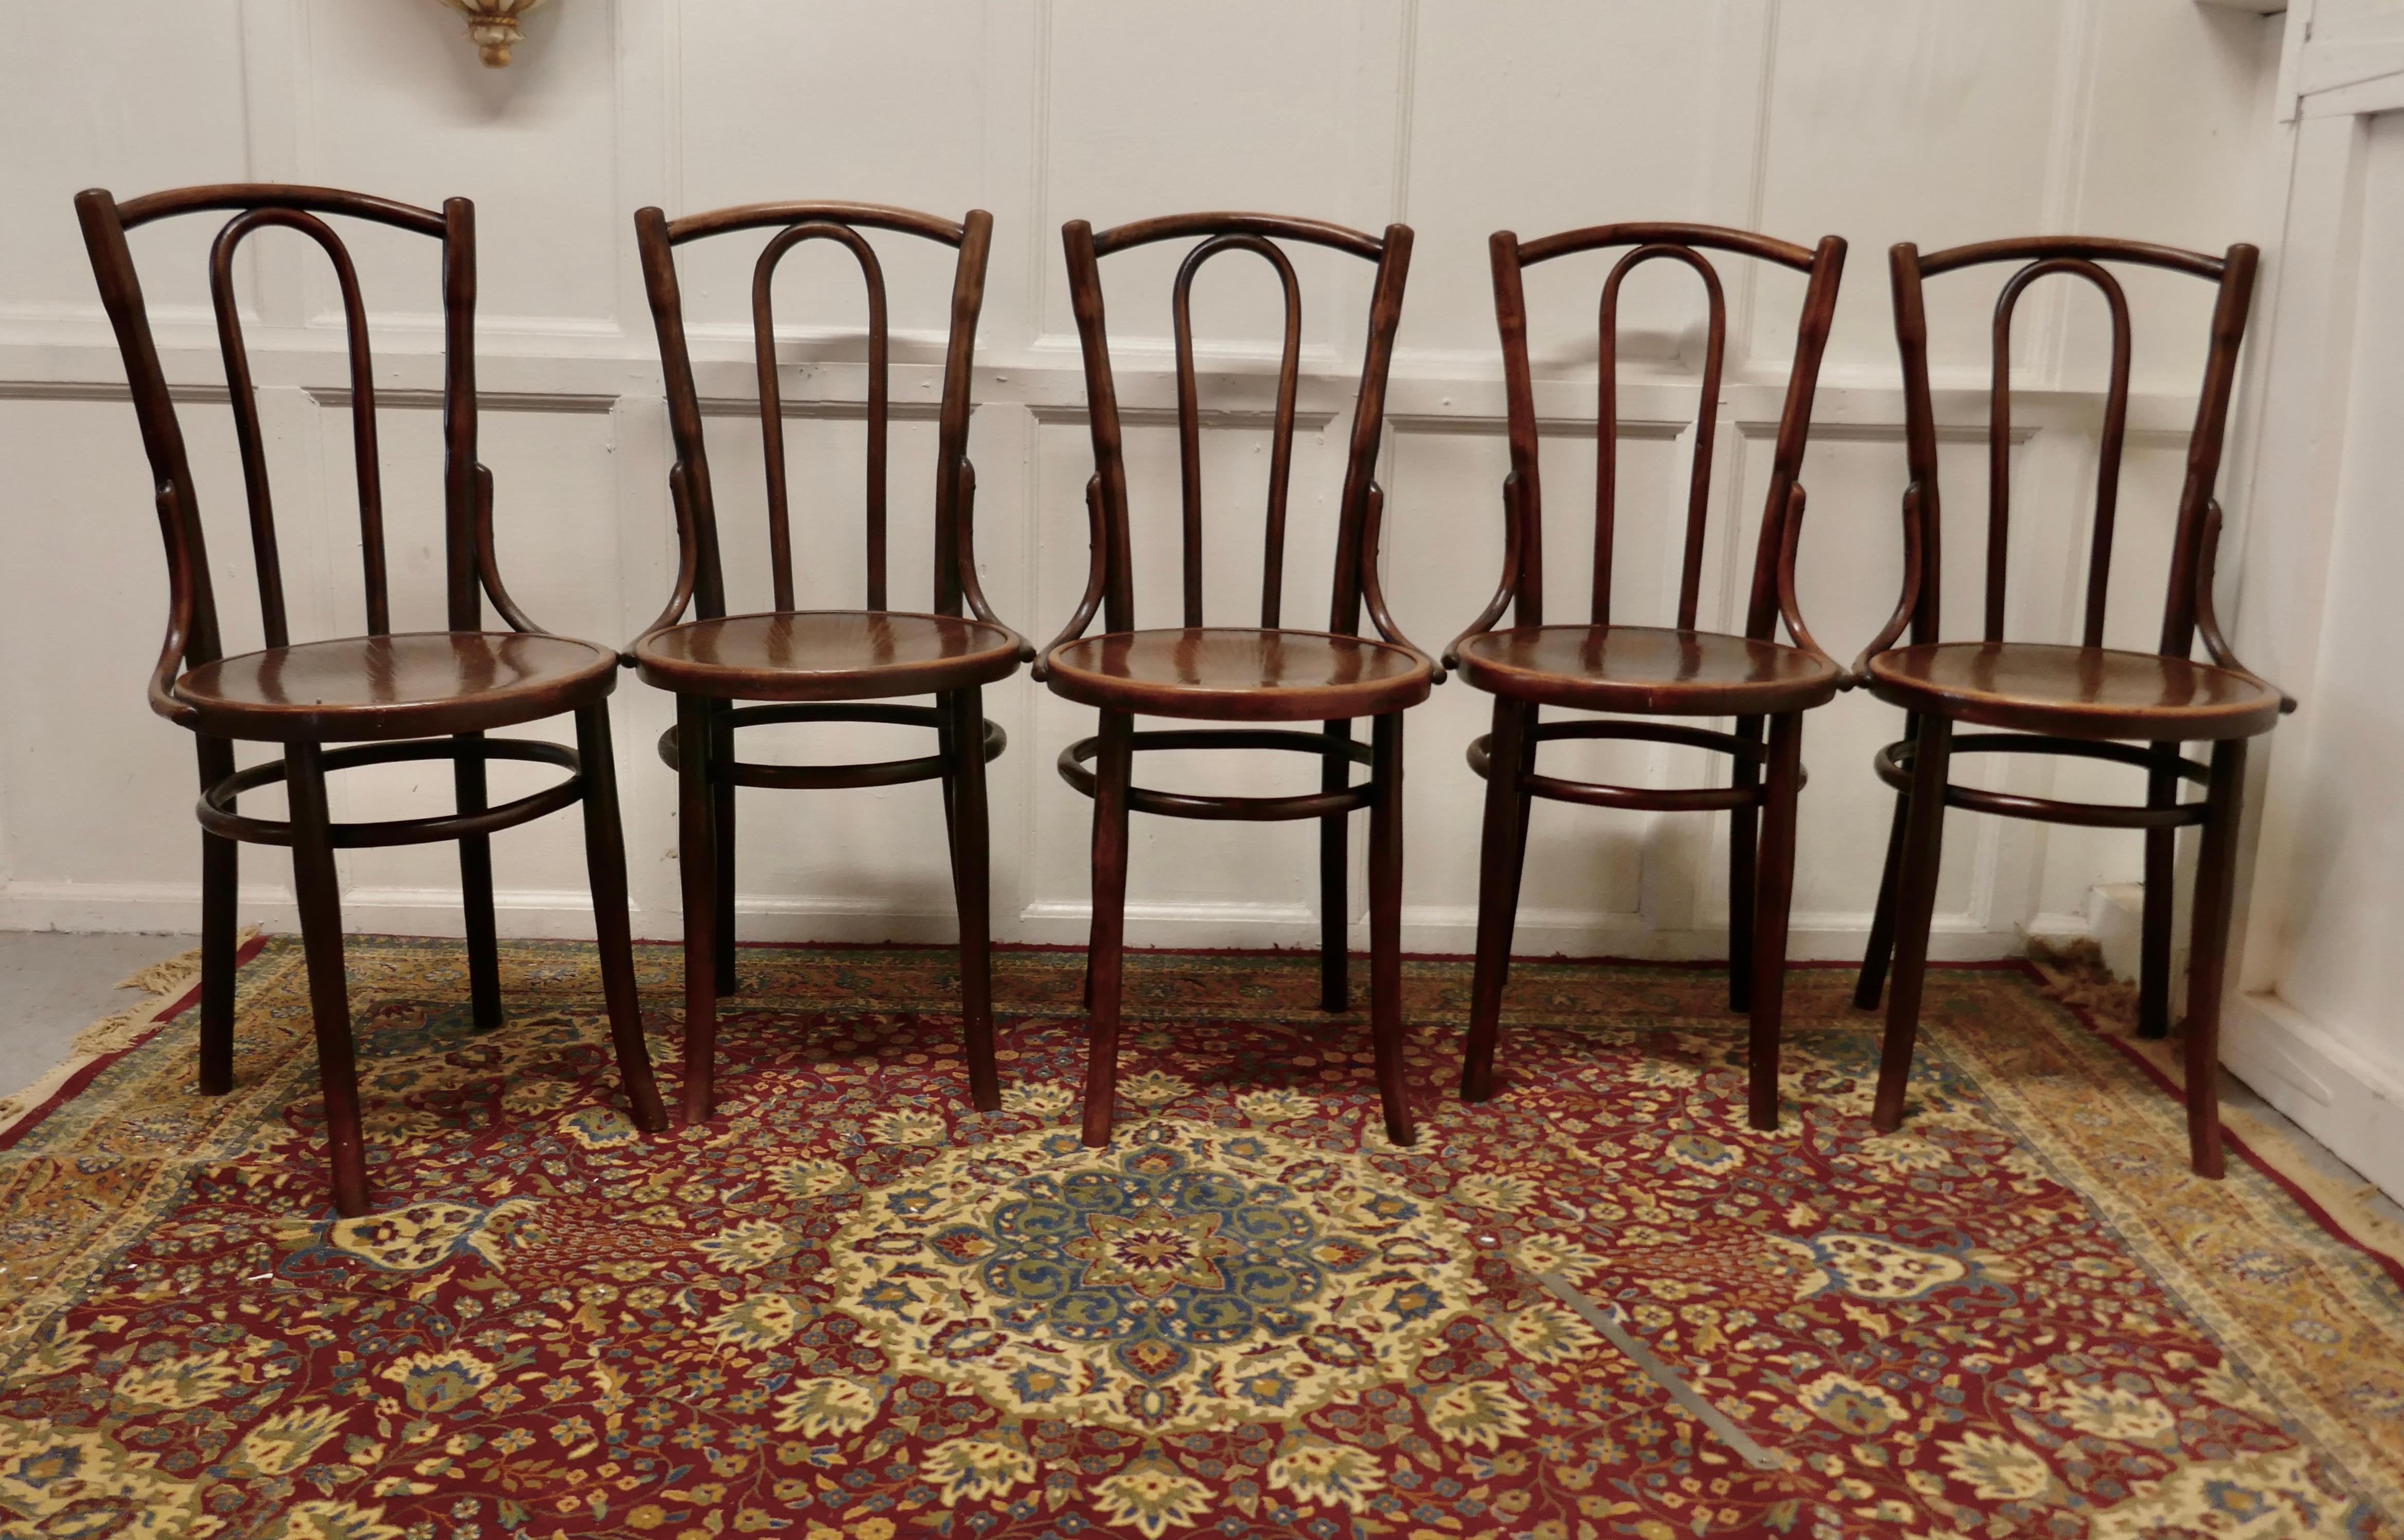 Set of 5 bistro bentwood chairs by Mazowia

A good sturdy set of 5 café chairs, traditionally this type of chair was used in Bistros and Brassieres but they would make just as good kitchen chairs 
The chairs have pressed plywood seats with hooped